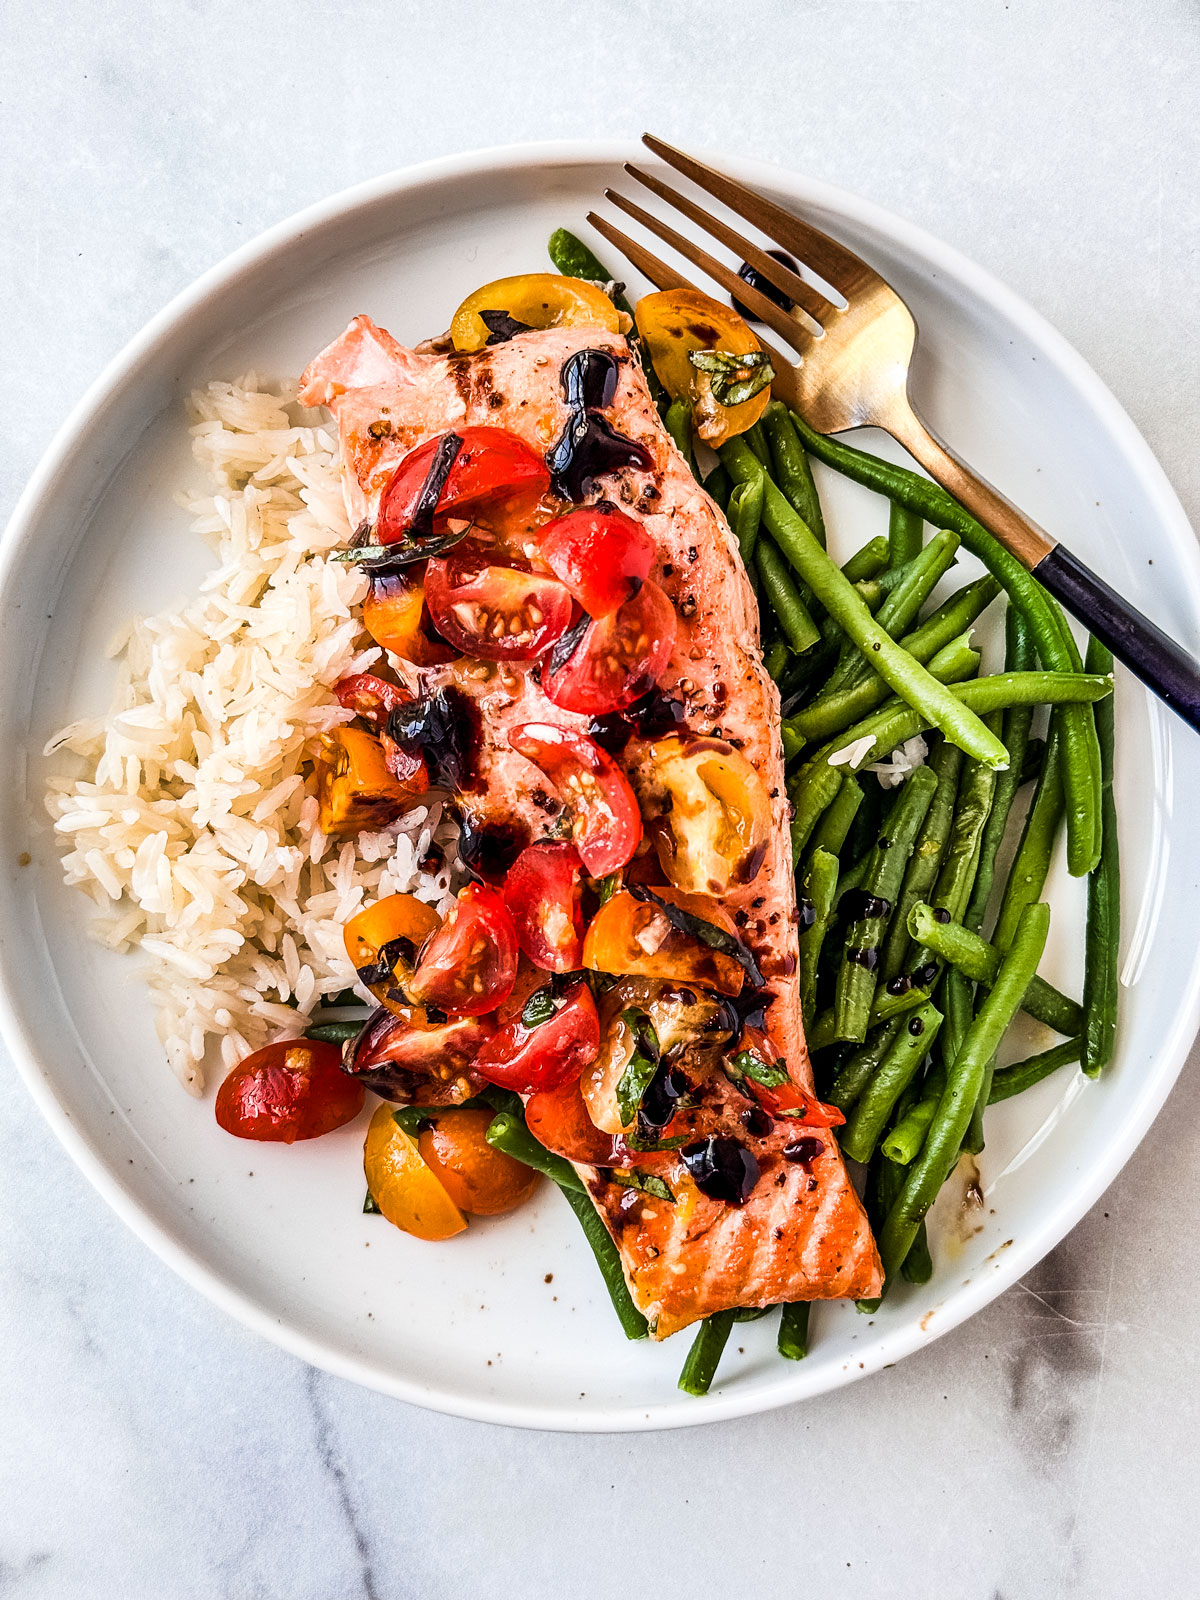 Grilled salmon with cherry tomato bruschetta topping on a plate with rice and green beans.